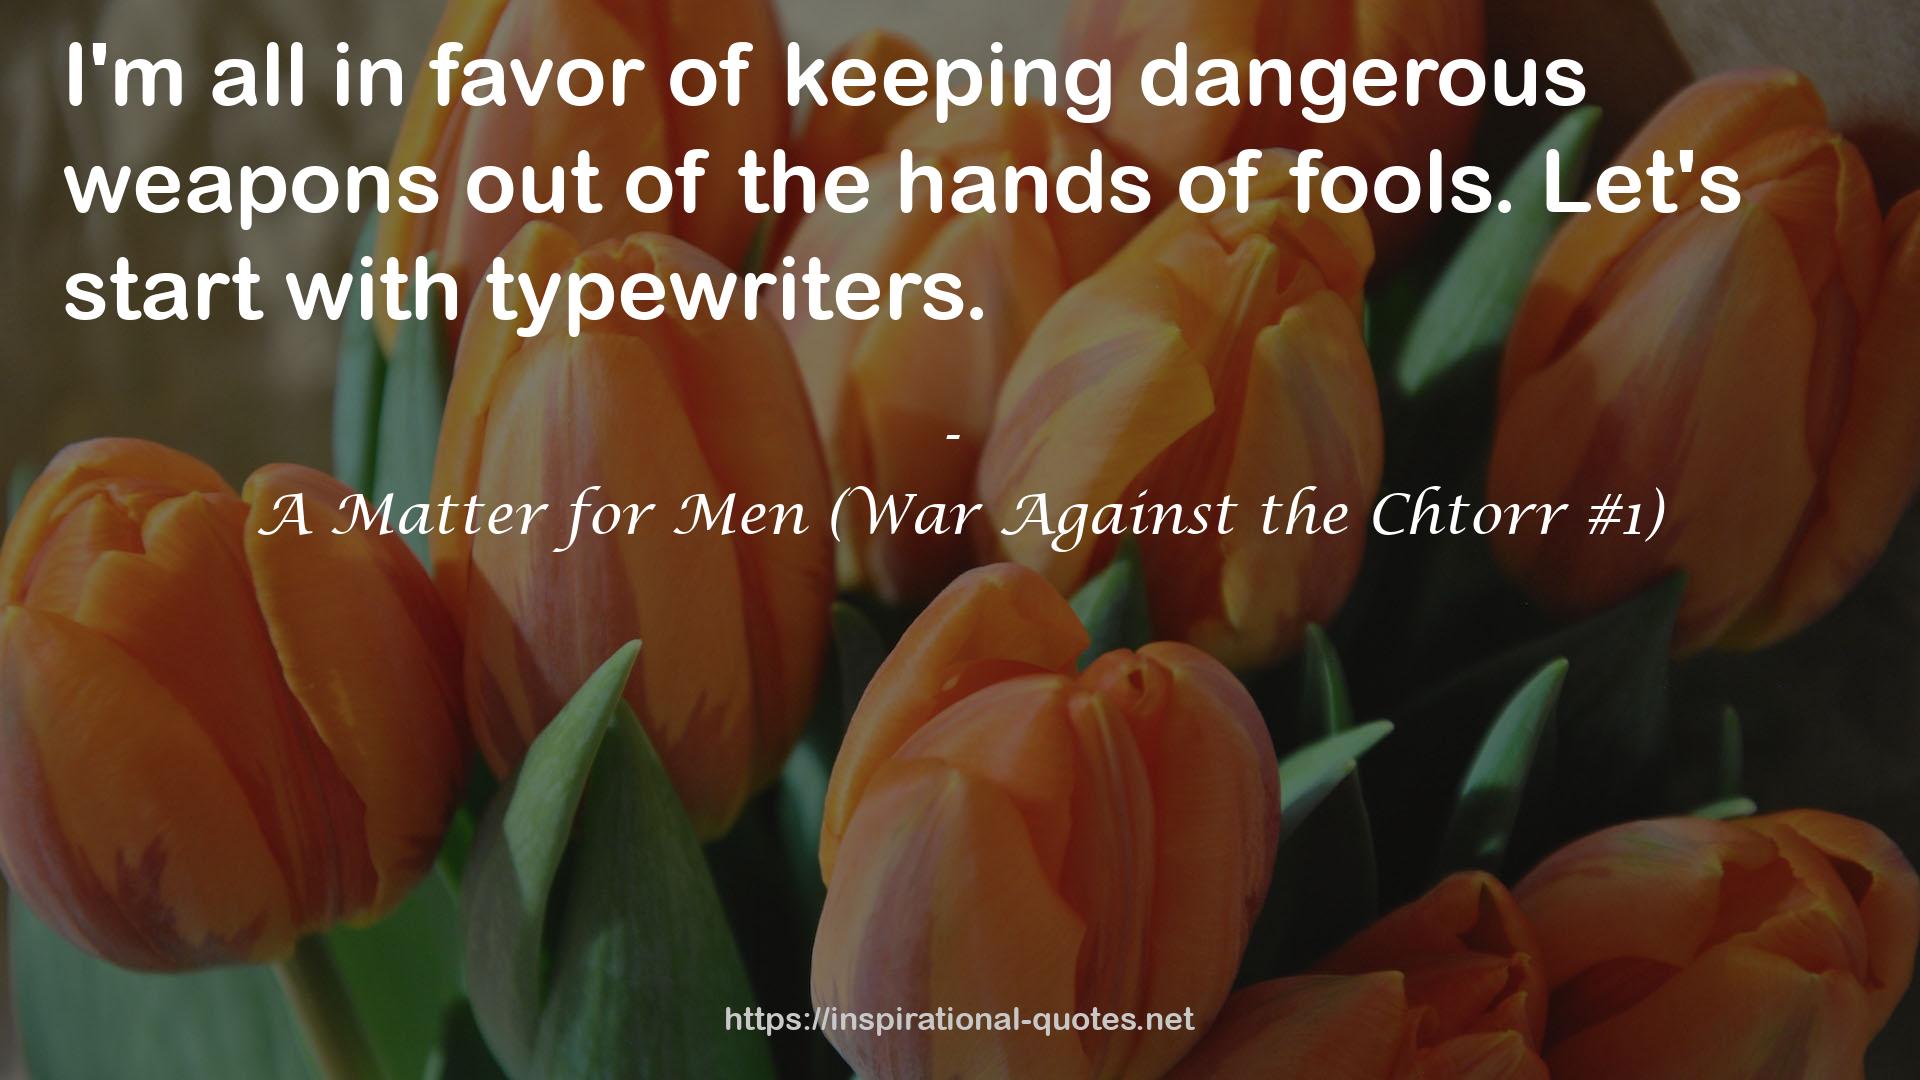 A Matter for Men (War Against the Chtorr #1) QUOTES